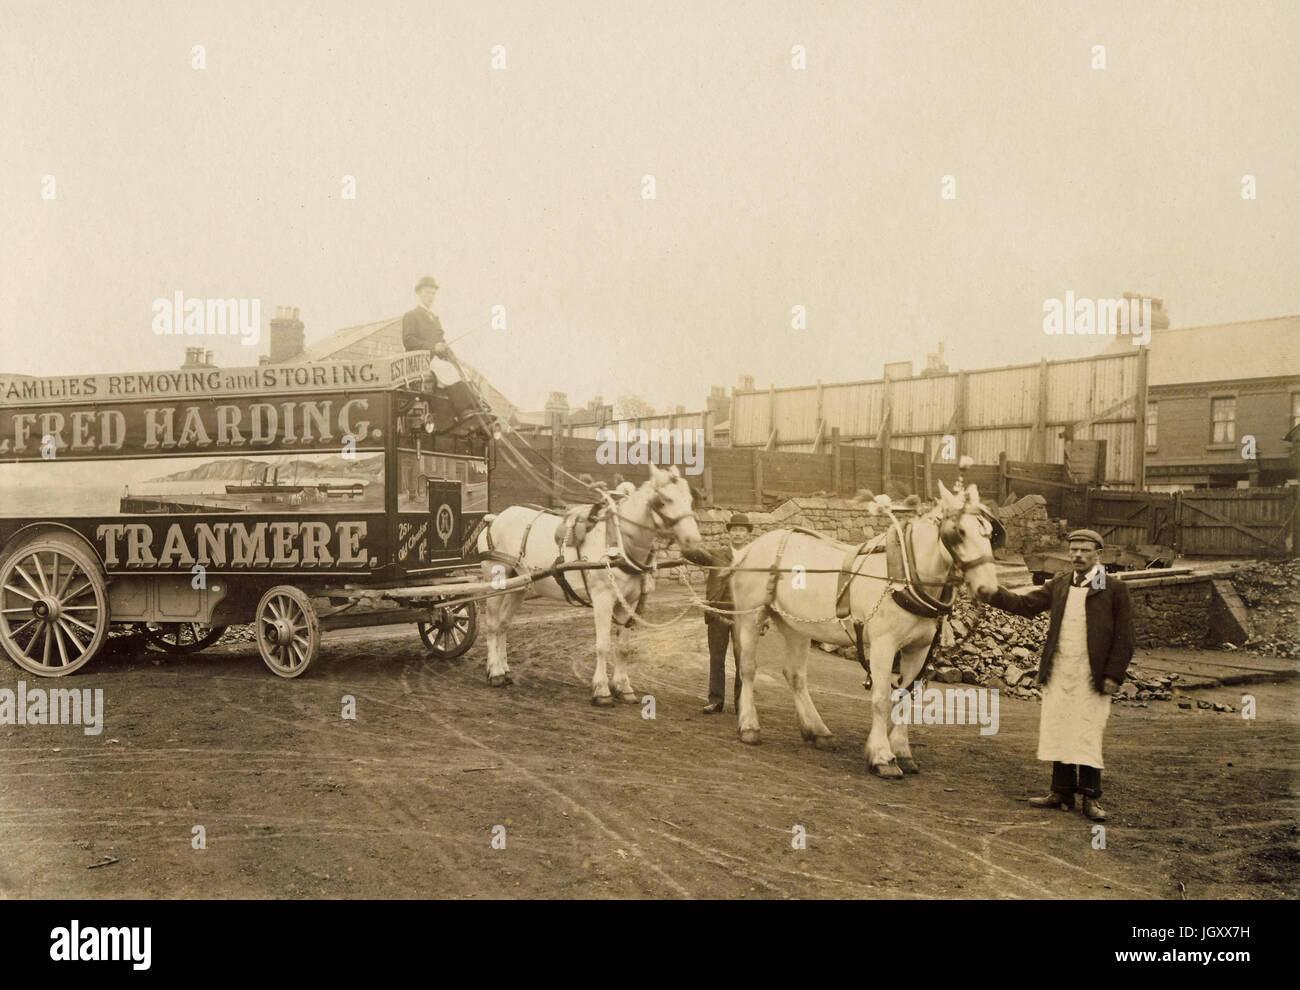 Horse-drawn removal company, Alfred Harding of Tranmere, c1910s, Historic Archive photograph Stock Photo